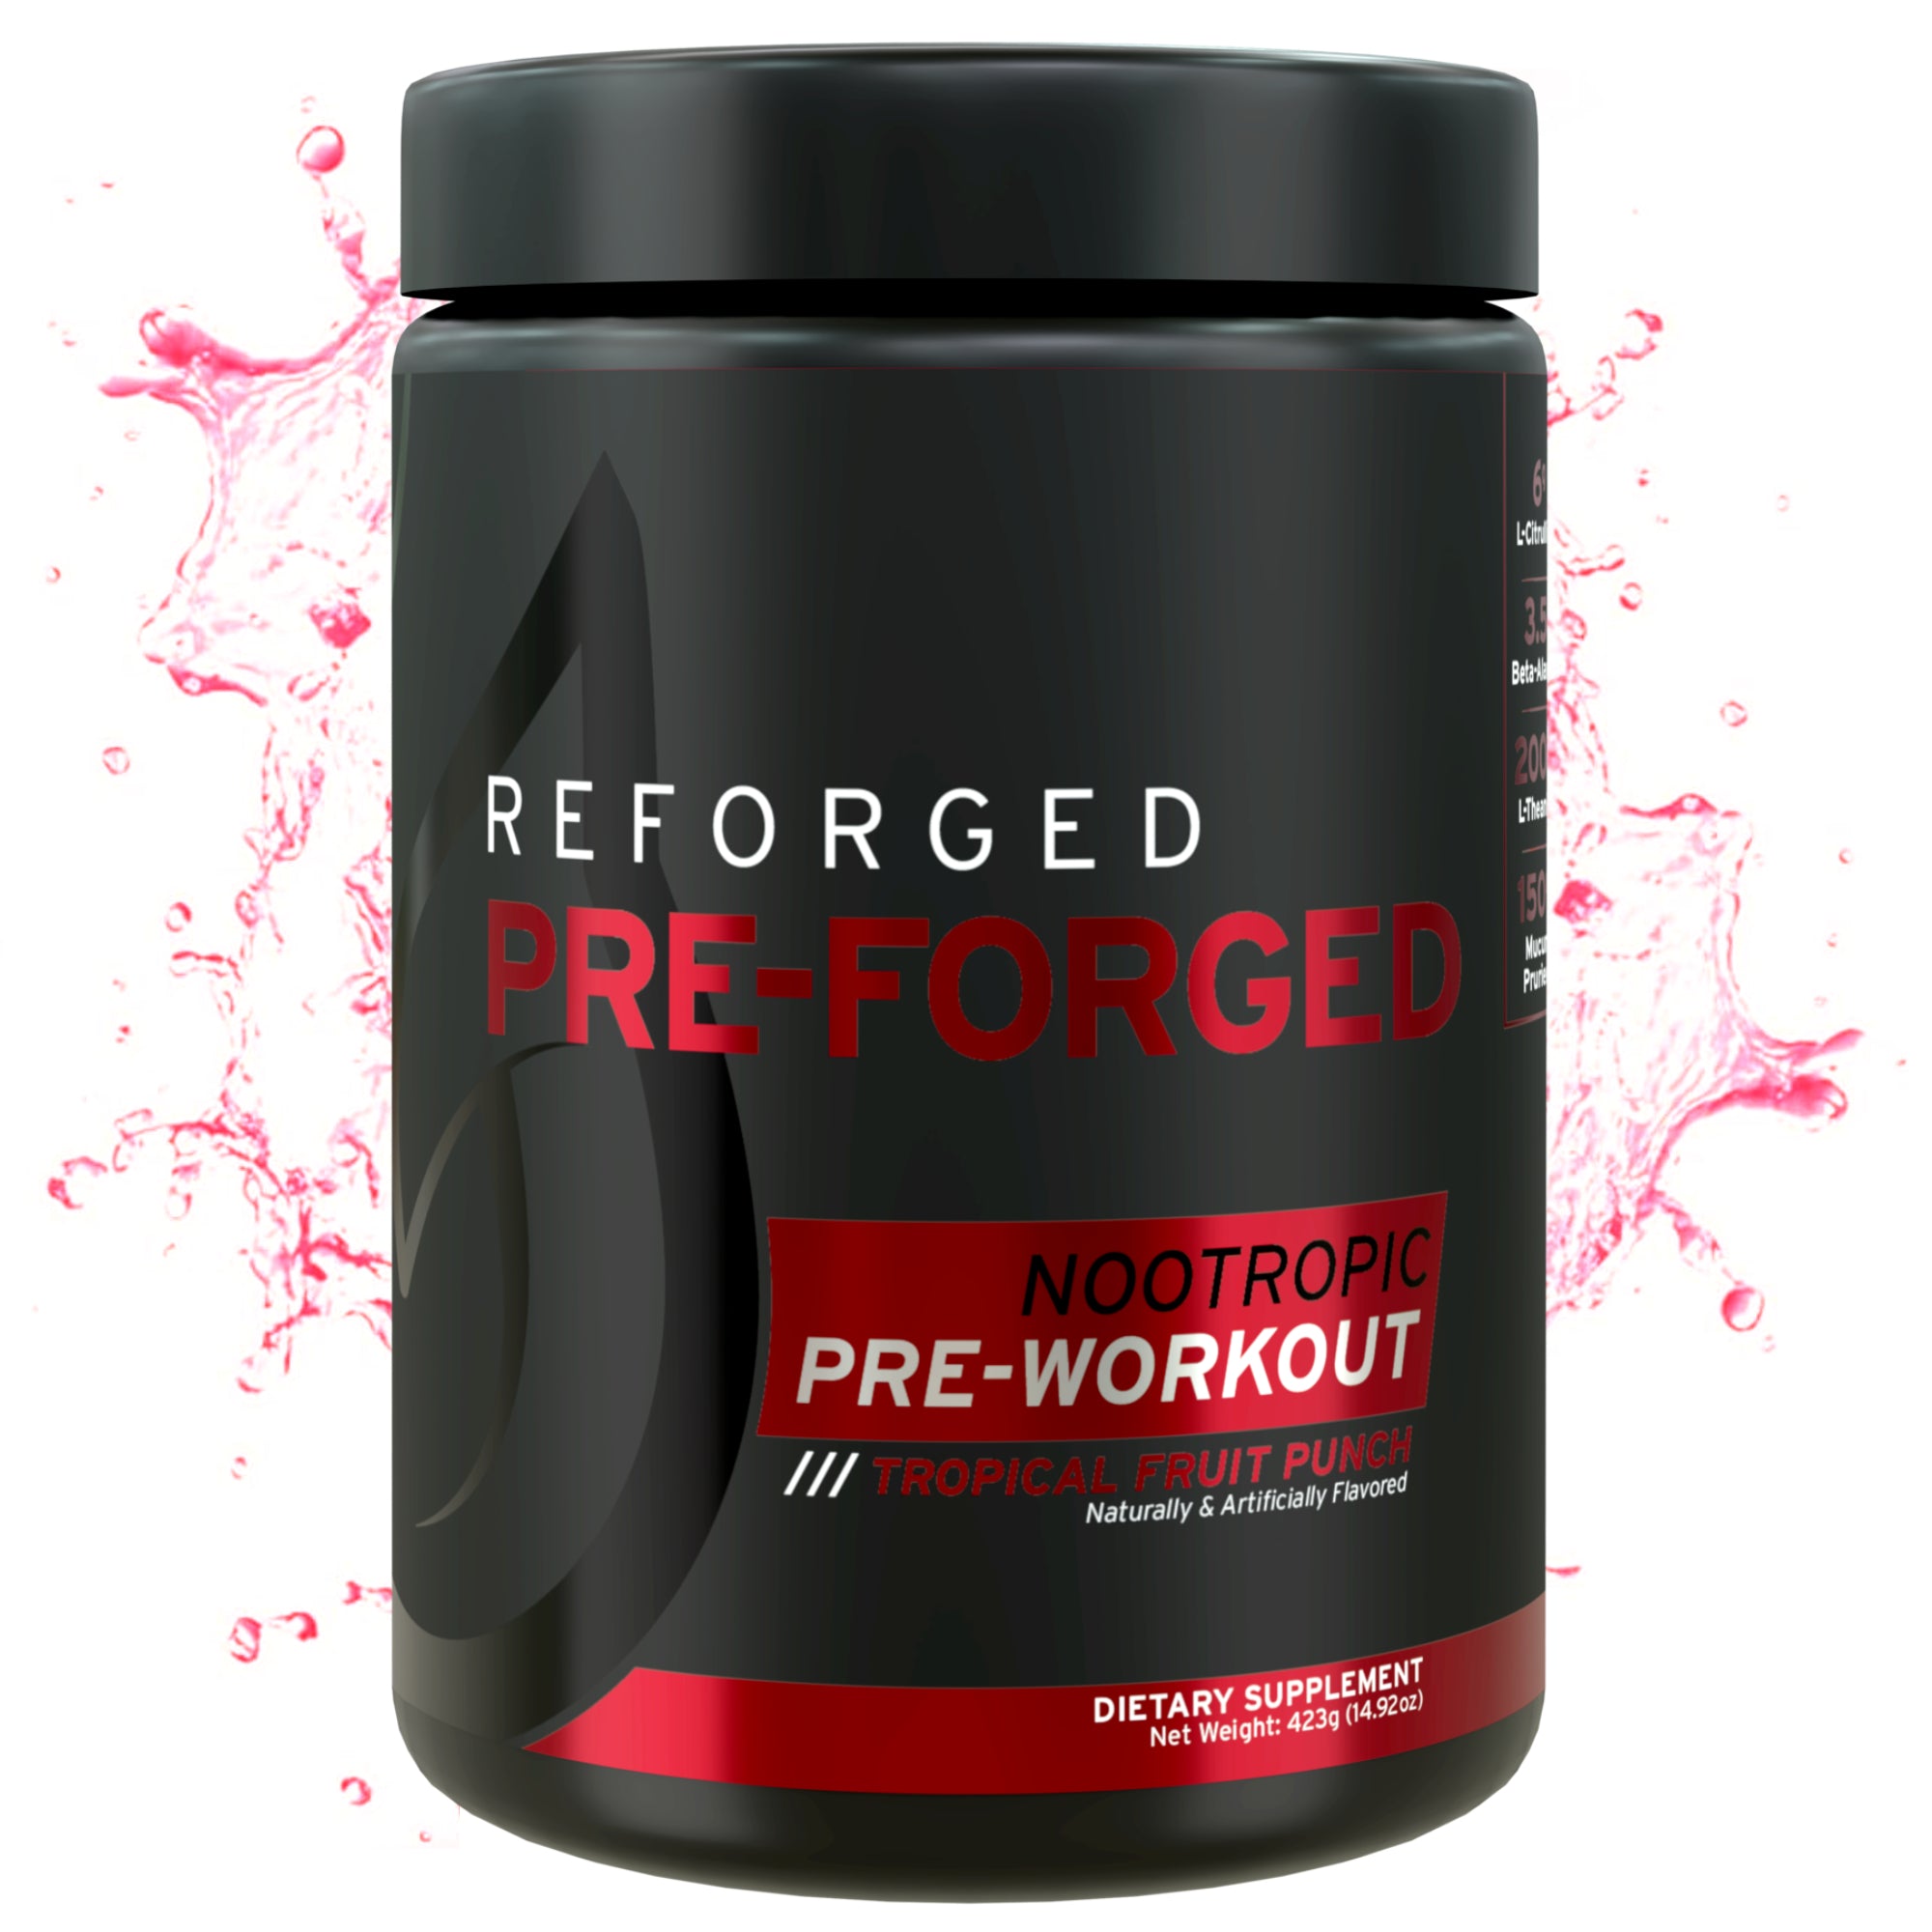 Pre-Forged Pre-Workout